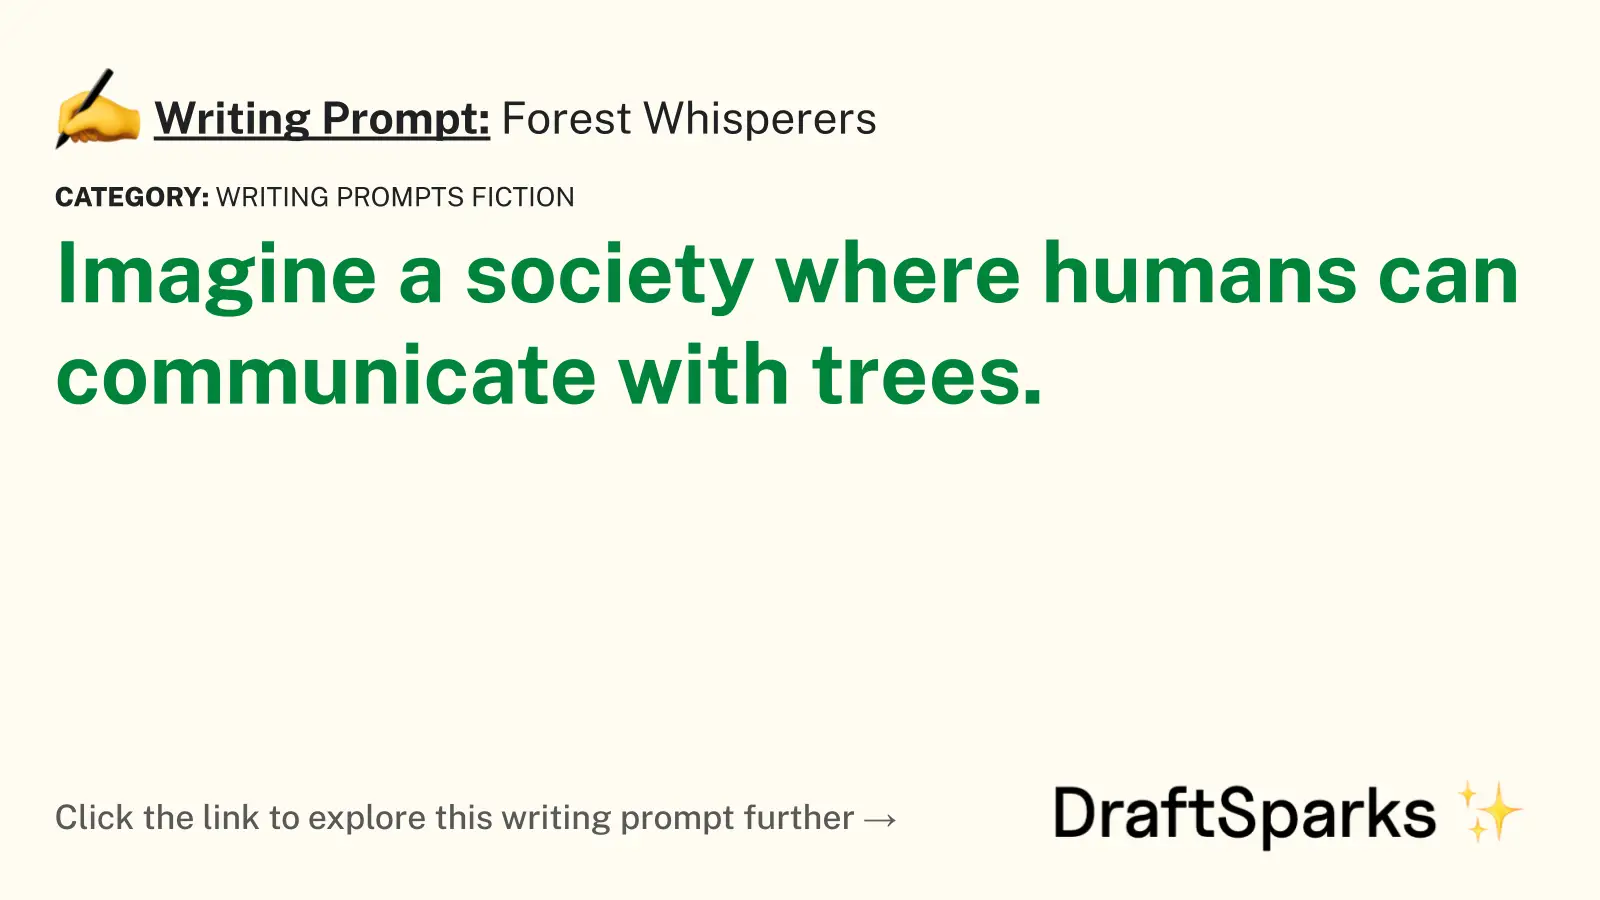 Forest Whisperers